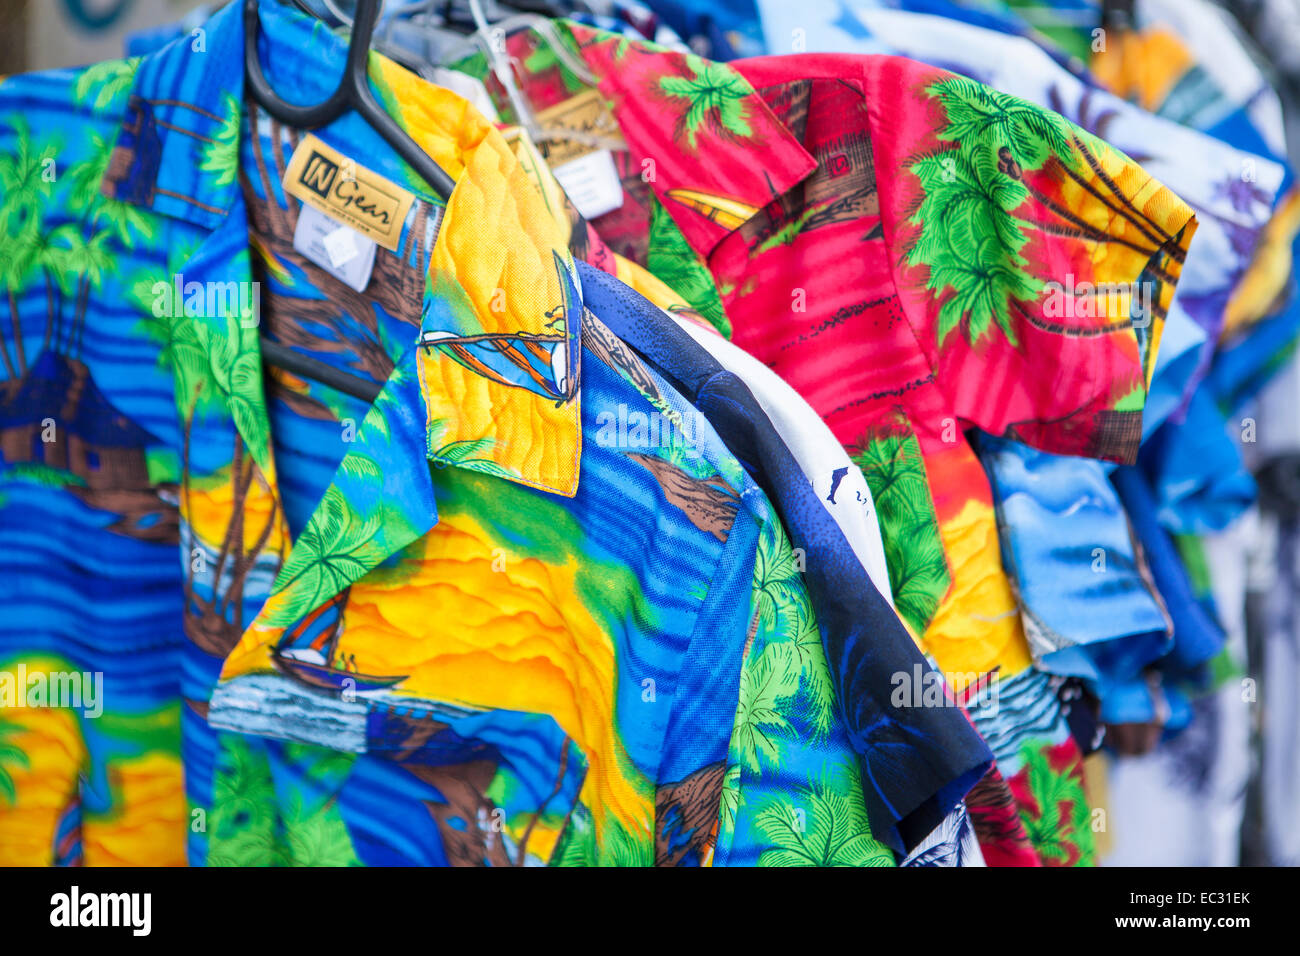 Hawaiian style surfer shirts for sale,Pismo Beach, Central Coast, California, United States of America Stock Photo